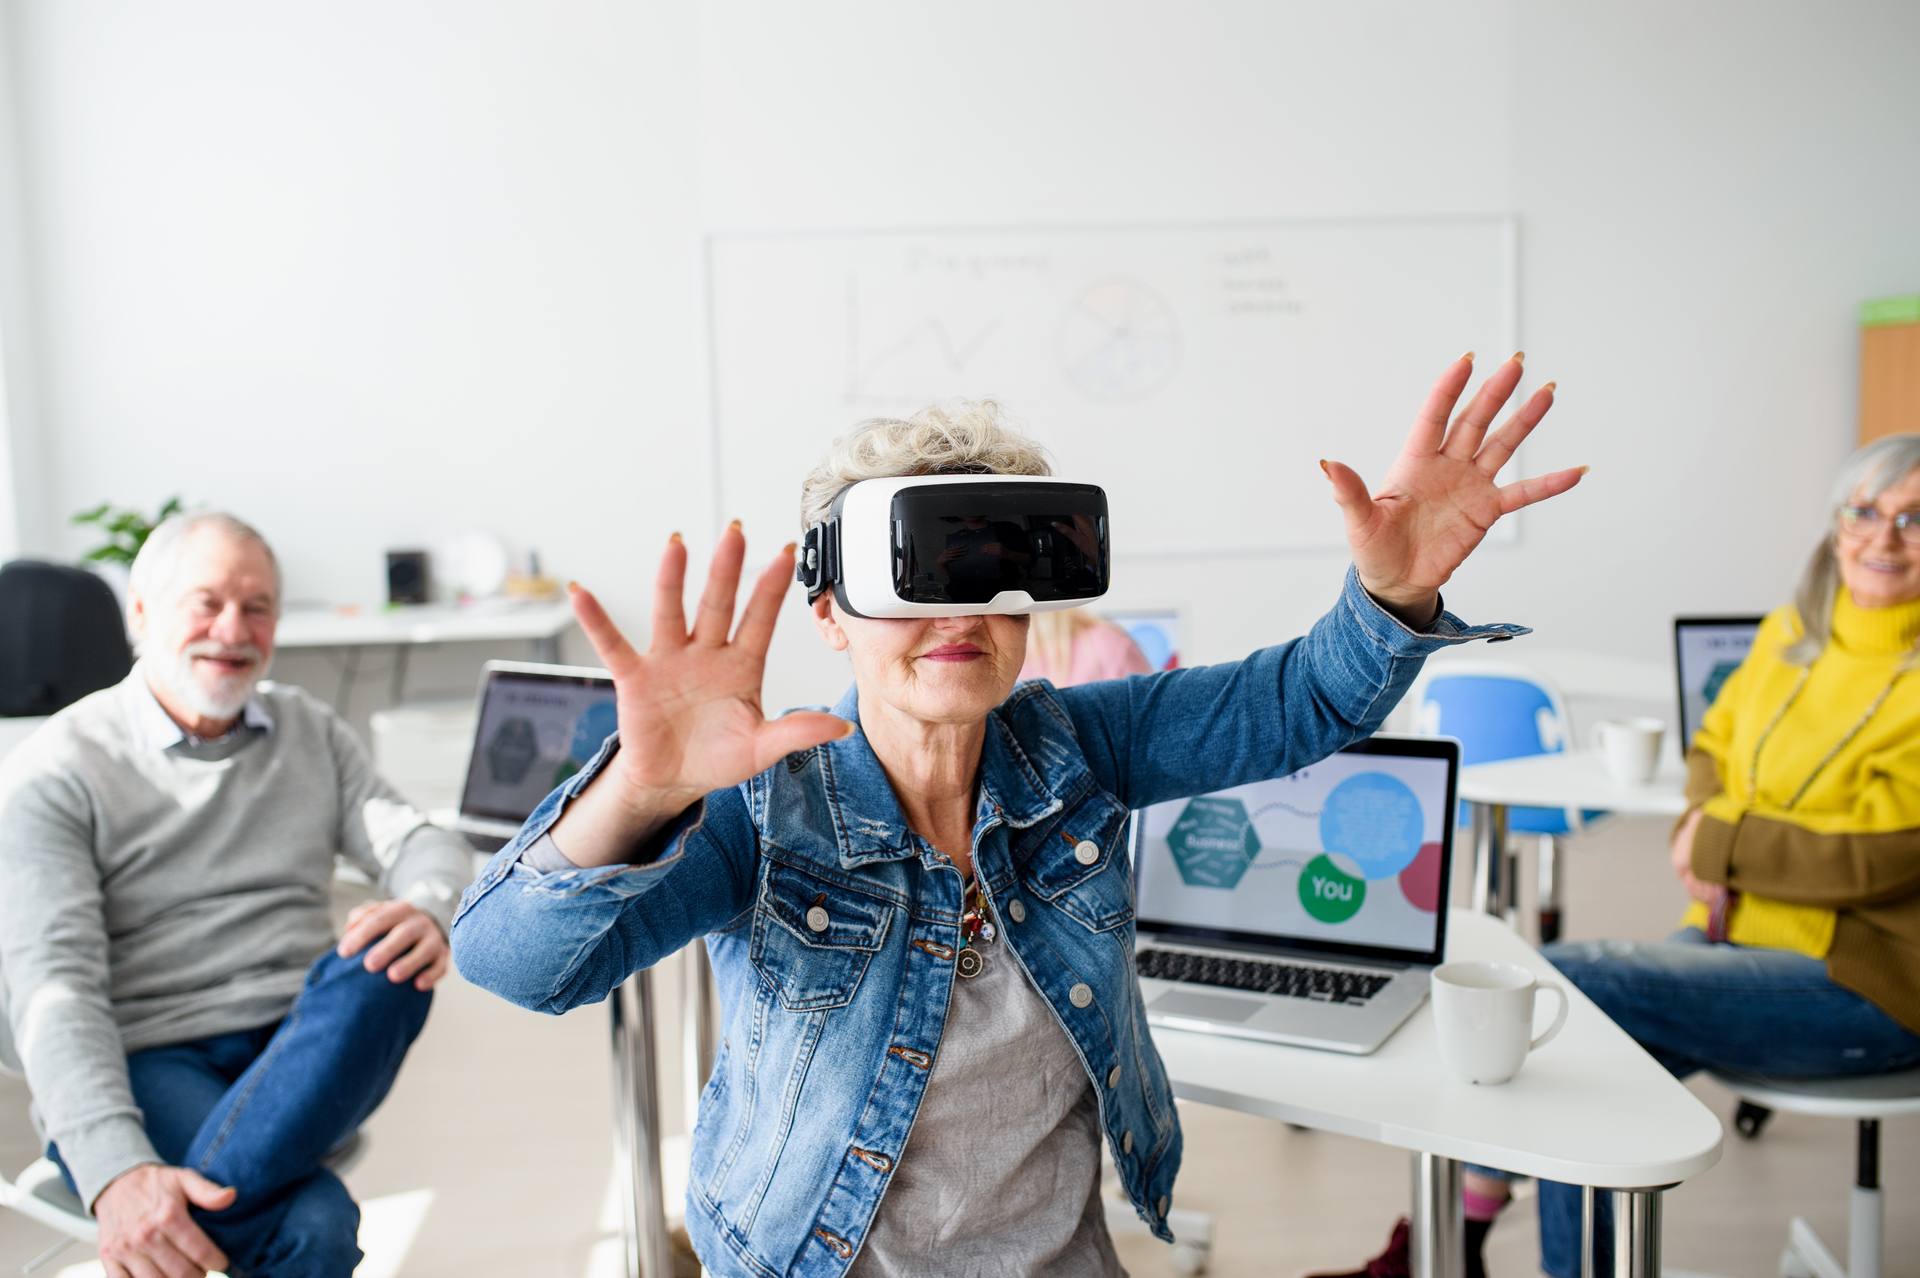 How Can You Experience Immersive Learning In An Online Class/Course?